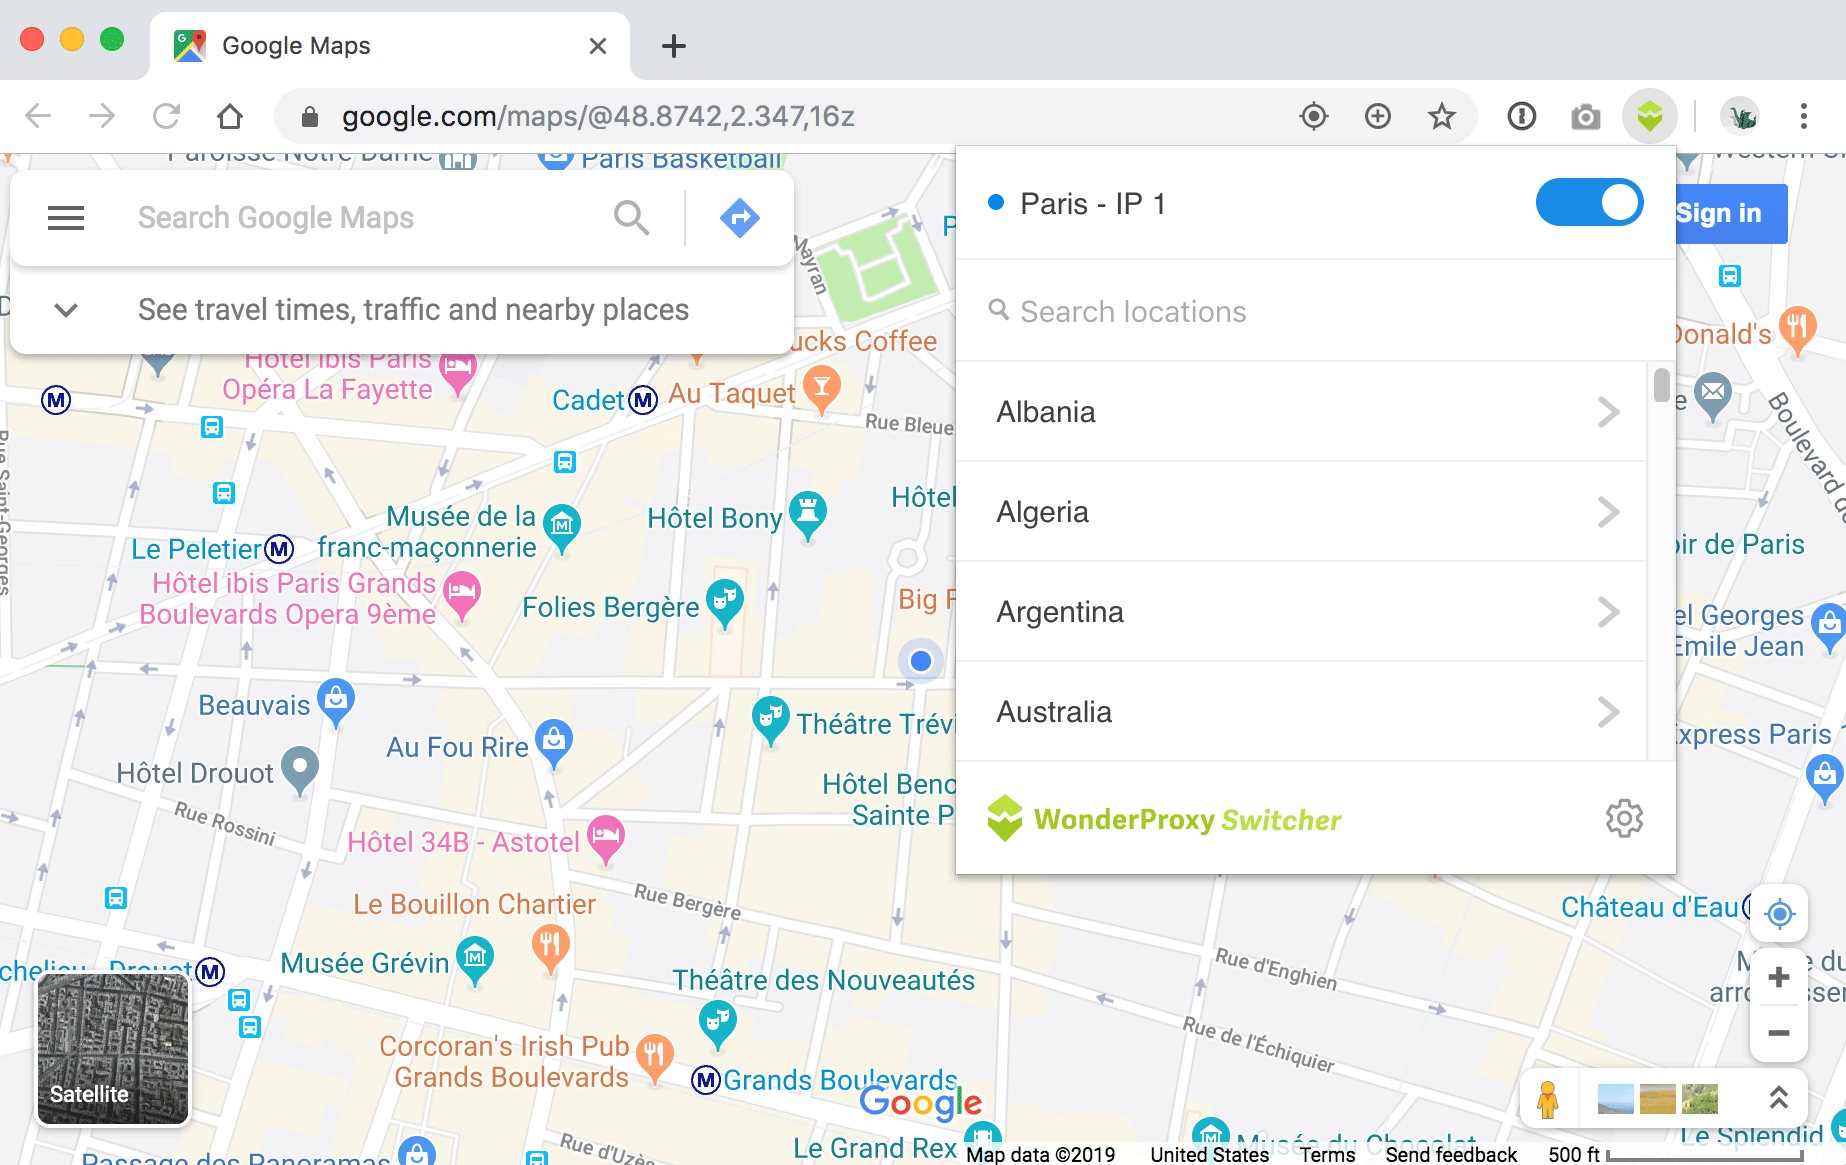 Testing Google Maps with Switcher extension using Paris proxy server